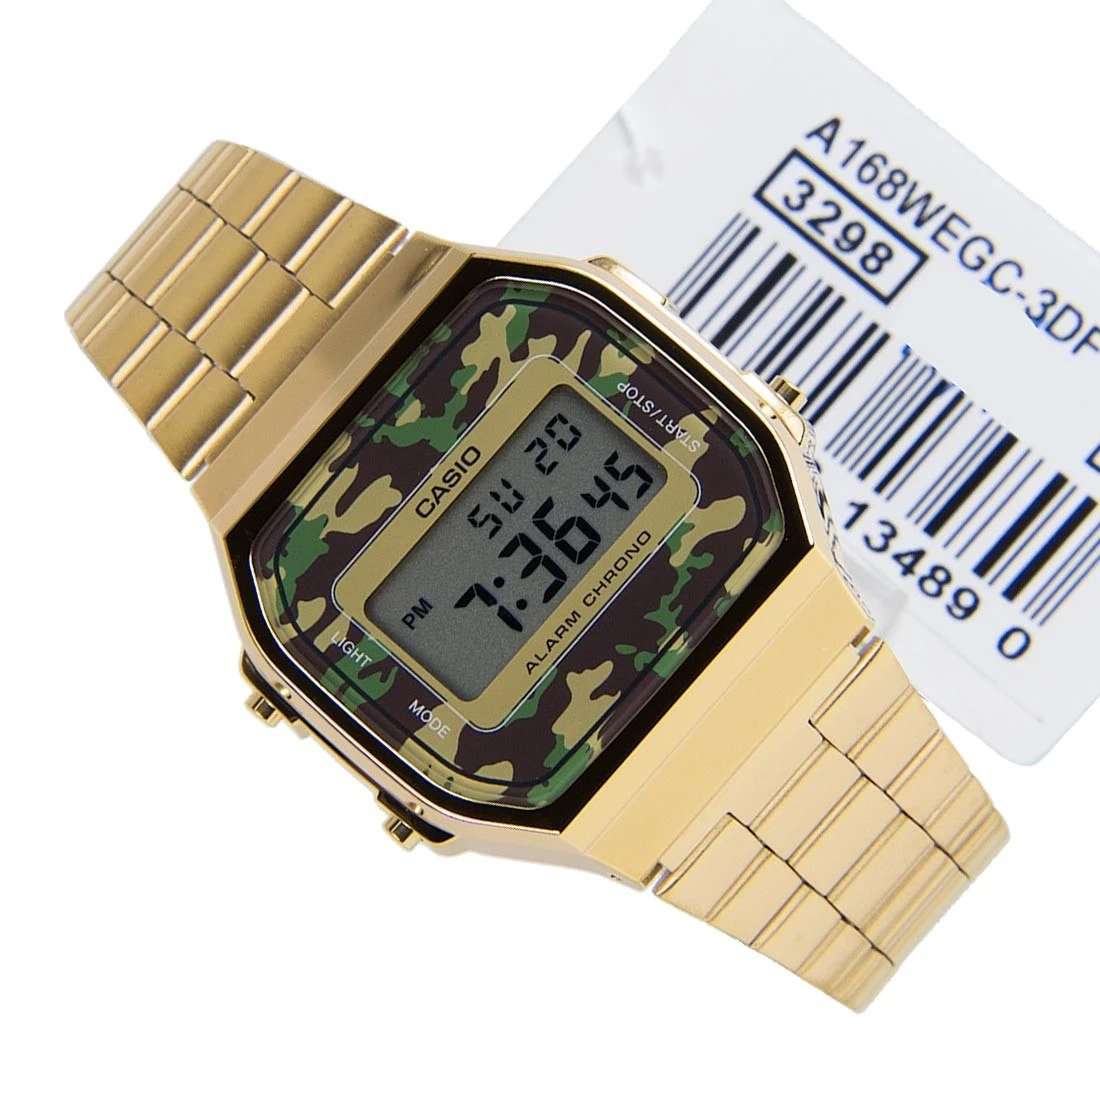 Casio Vintage A168WEGC-3D Gold Plated Stainless Steel Watch For Men and Women-Watch Portal Philippines